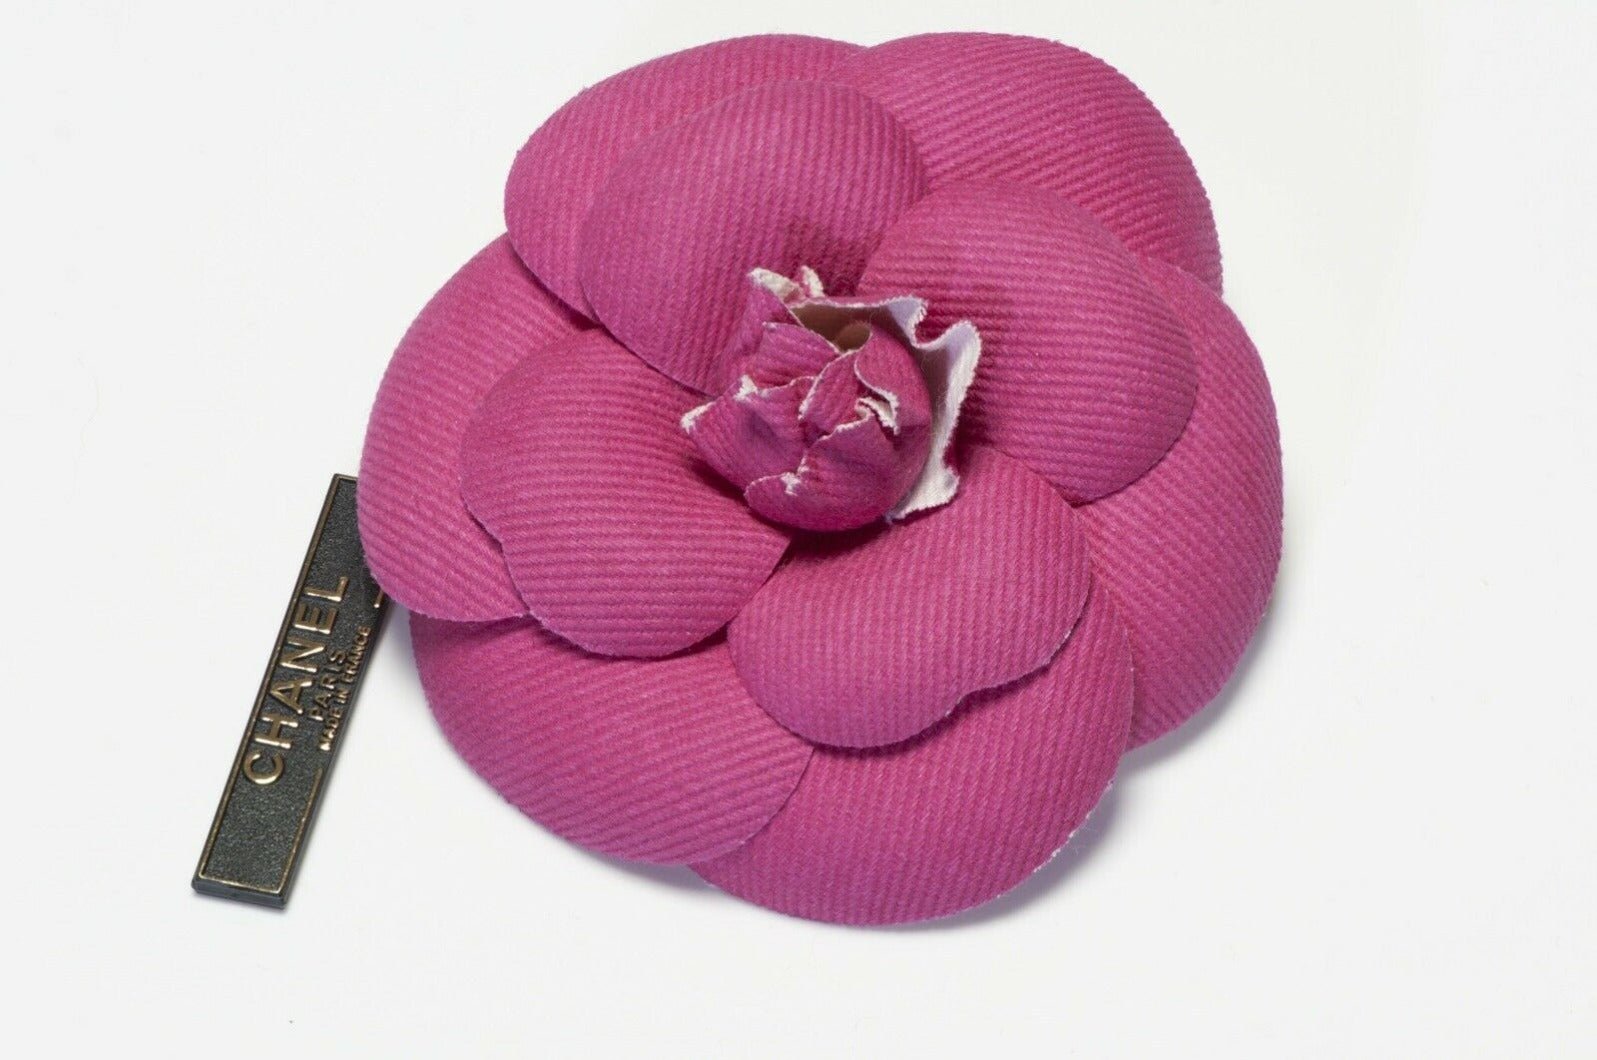 CHANEL Paris 1990’s Pink Fabric Camellia Flower Brooch